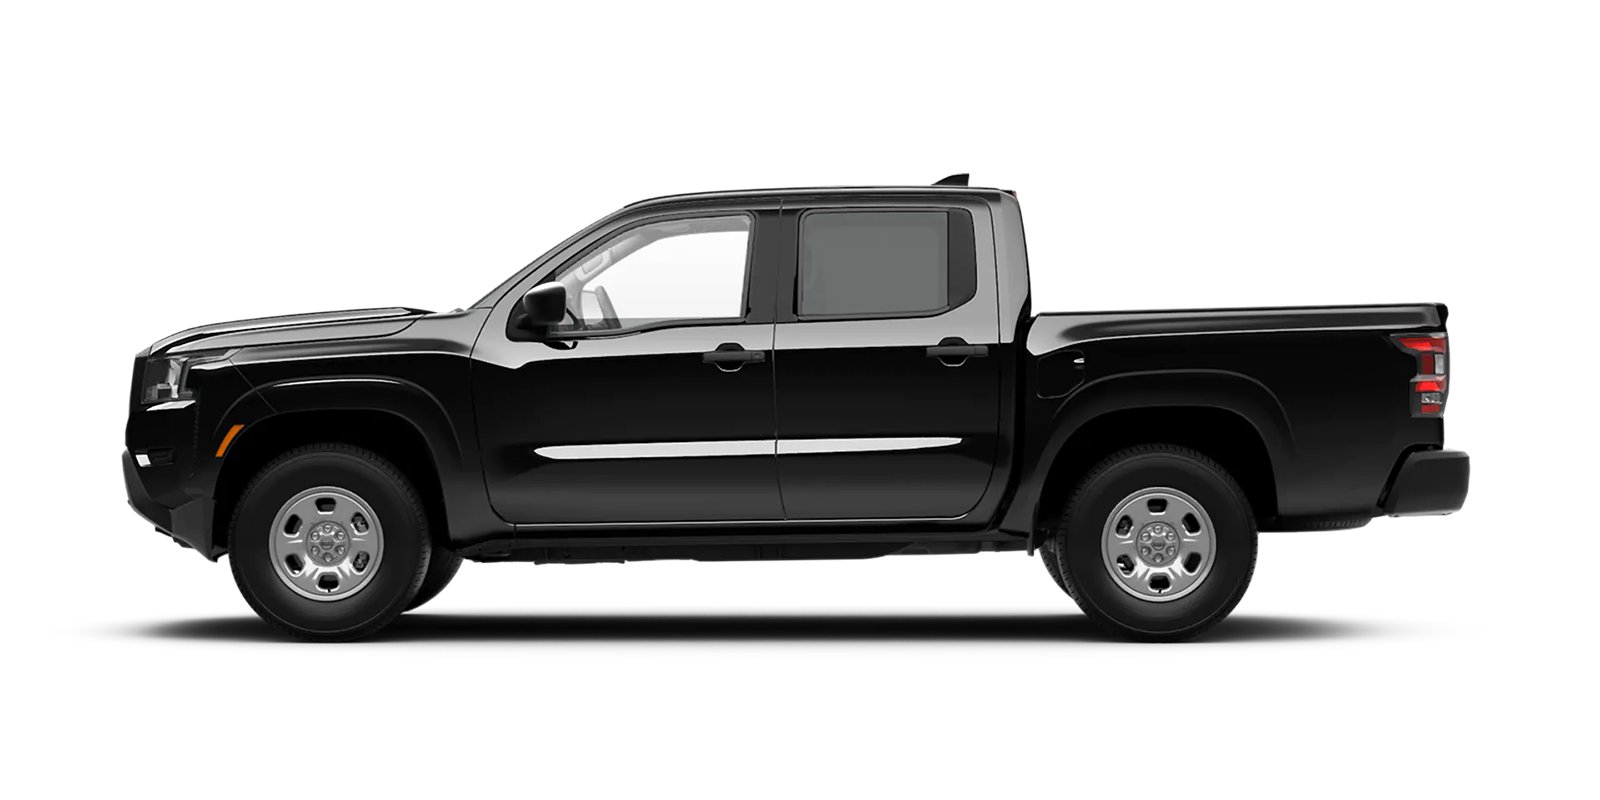 2022 Frontier Crew Cab S 4x4 in Super Black | Nationwide Nissan in Timonium MD